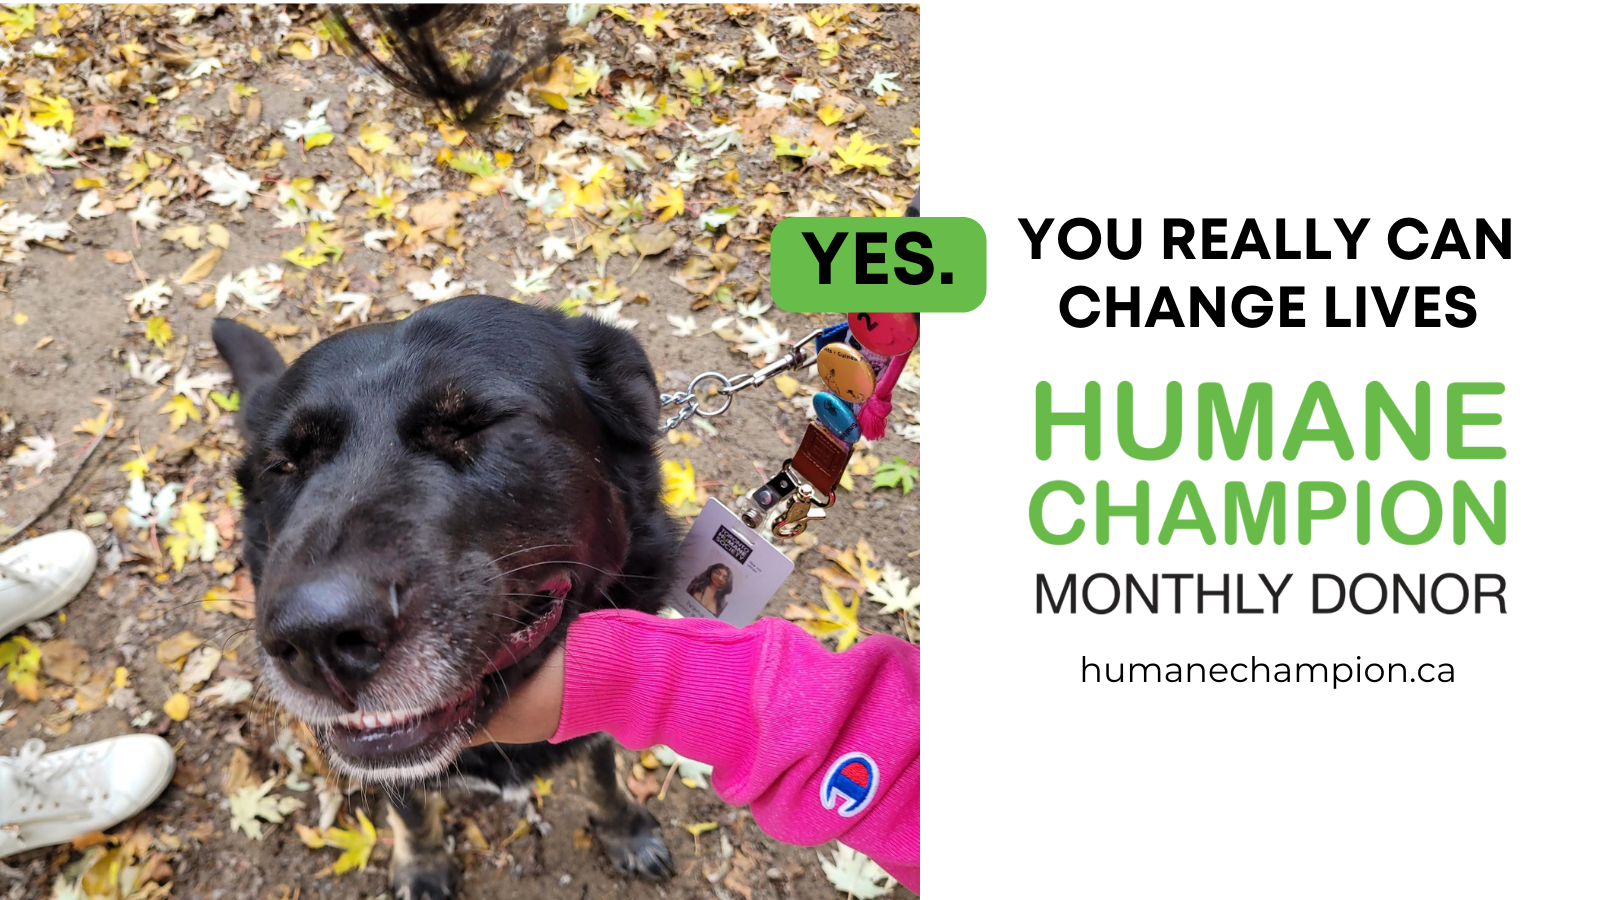 A successful story from our Humane Champion program